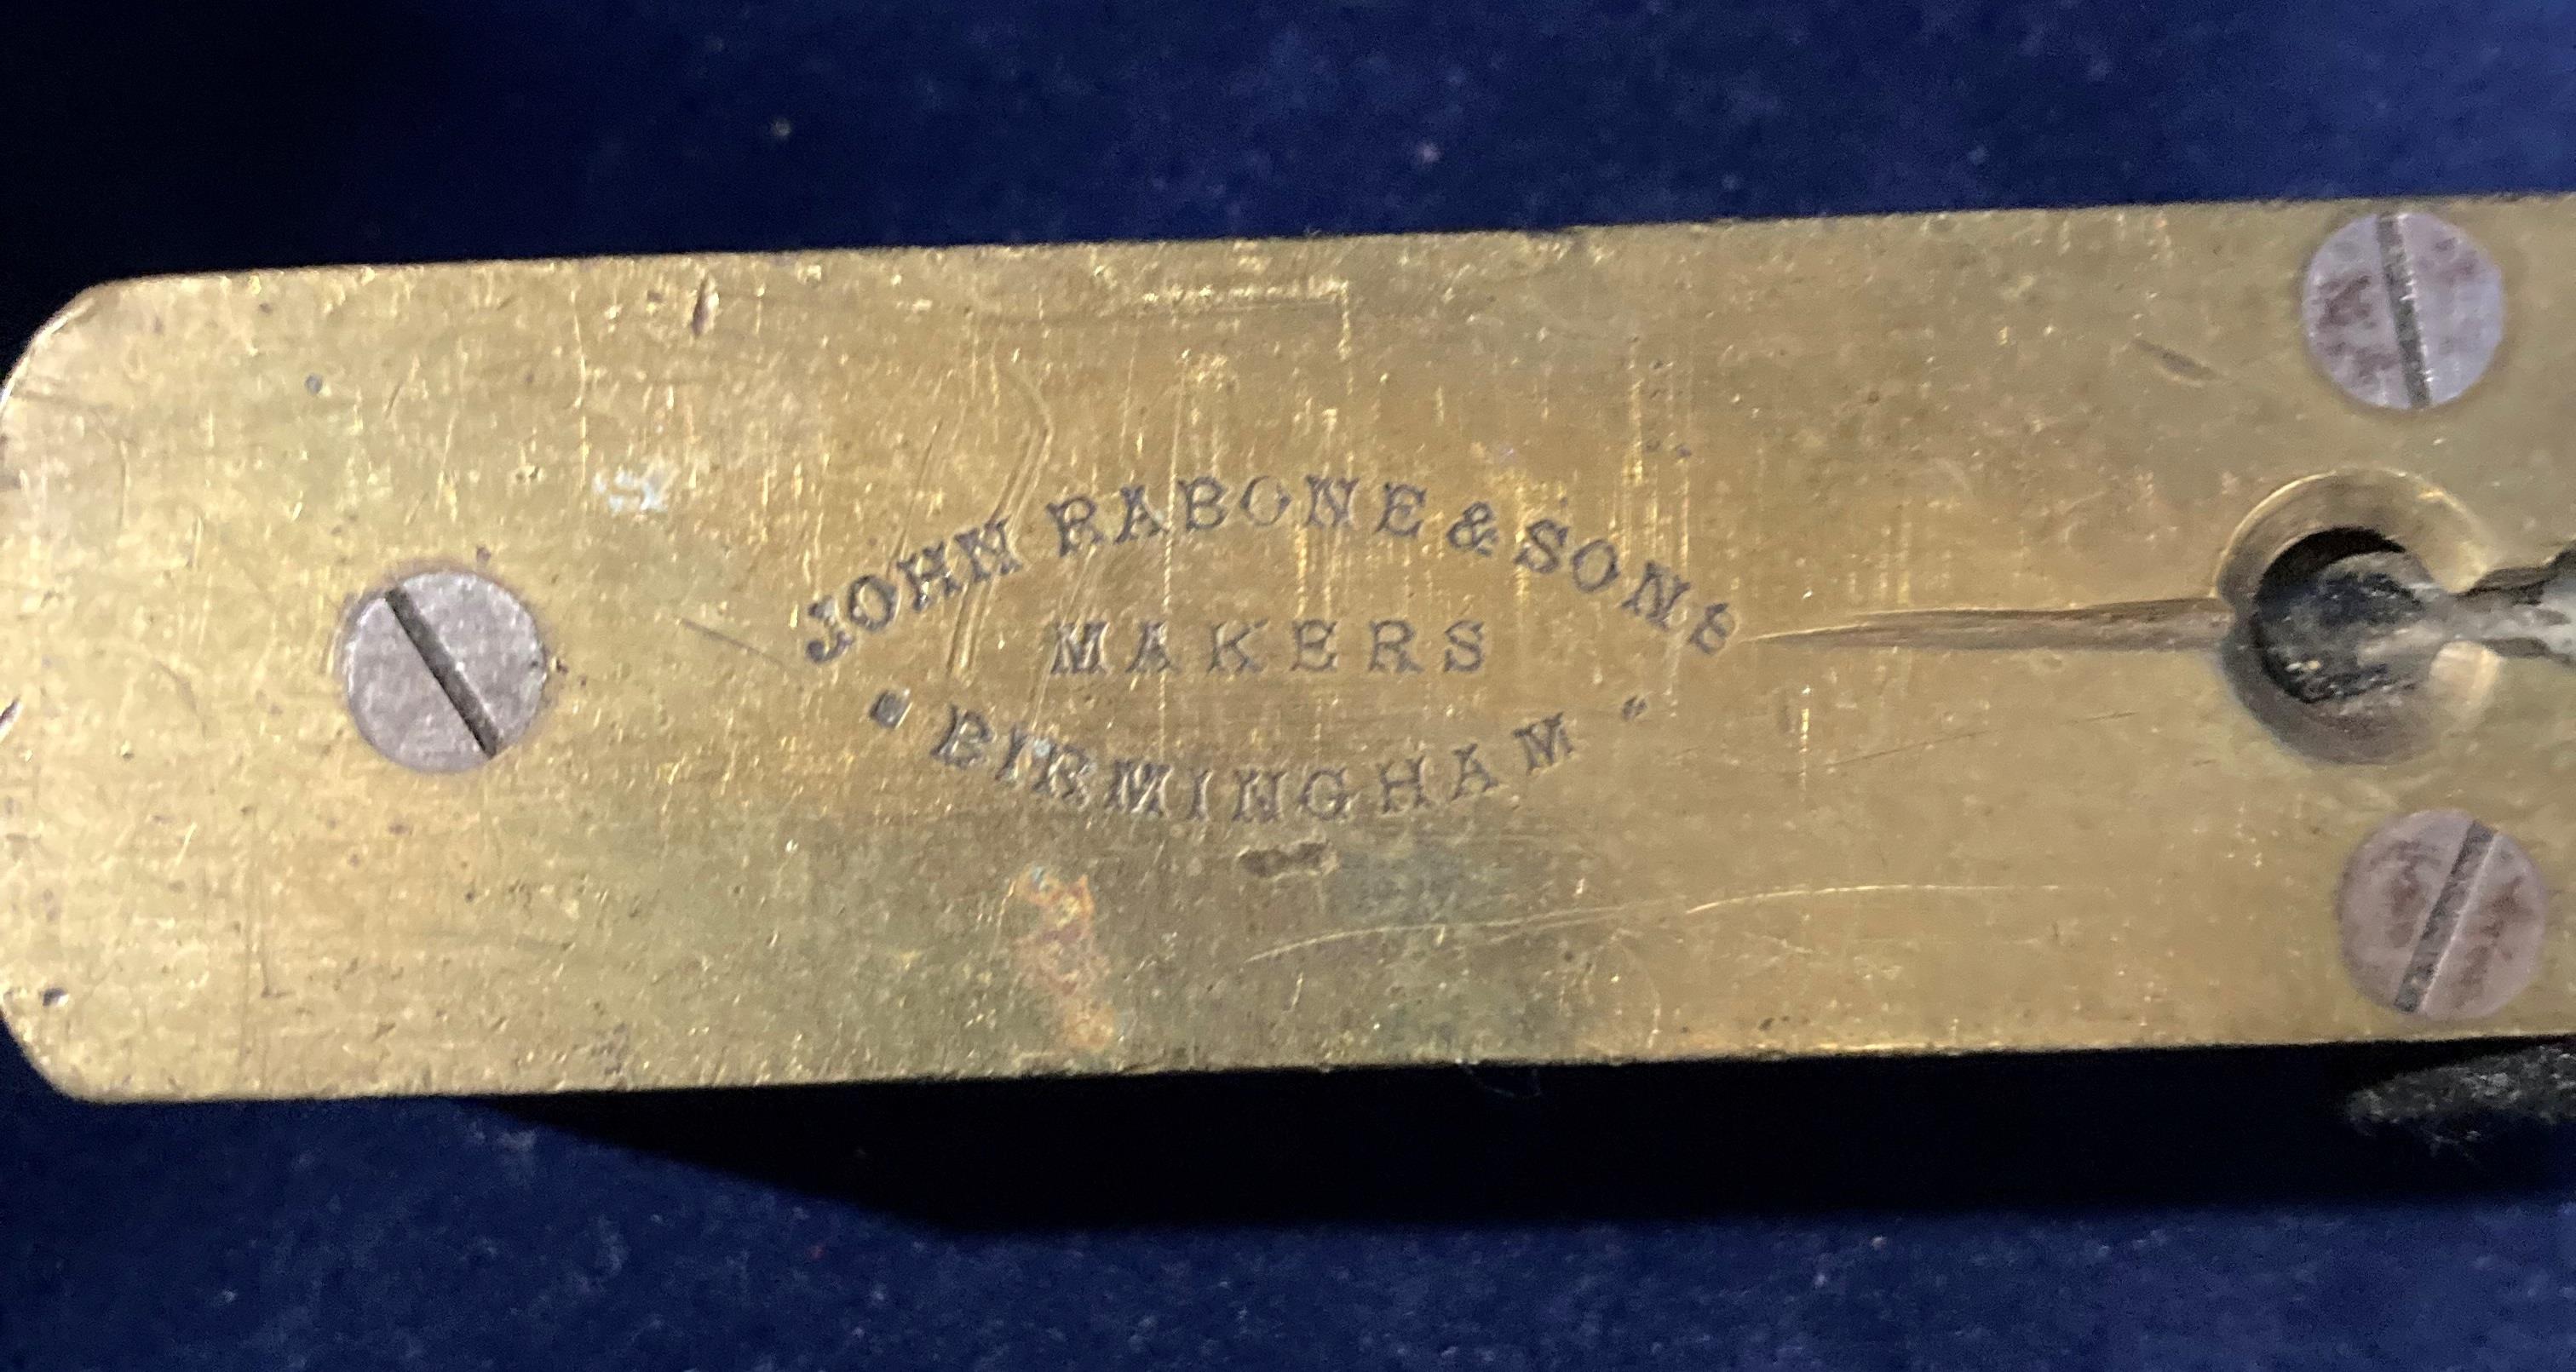 John Rabone & Sons Makers Birmingham wood spirit level with brass face and a Military compass in - Image 4 of 4